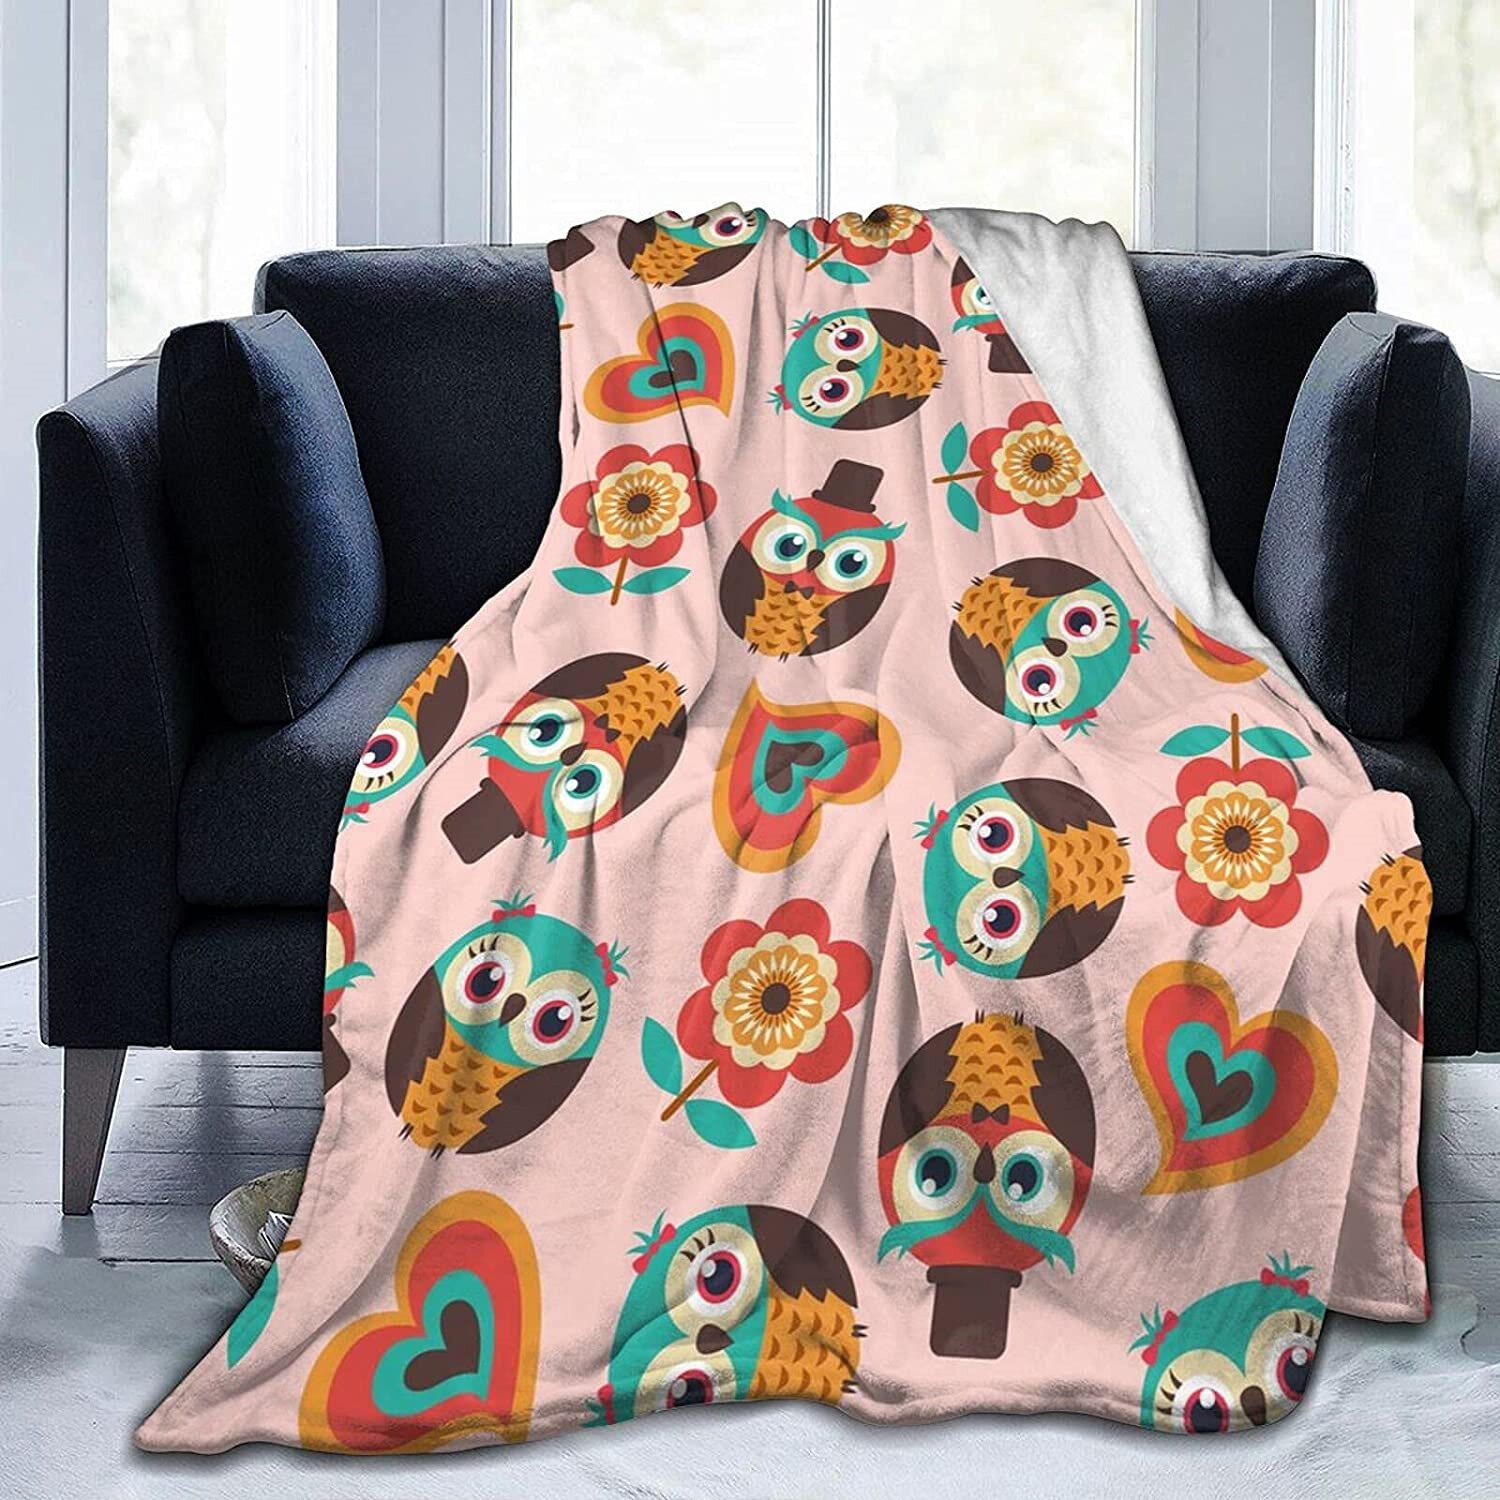 Pretty Cute Fleece Winter Throw Blankets for Adults Suitable Bed Couch Outdoor Soft Cozy Owl Flannel Blankets 